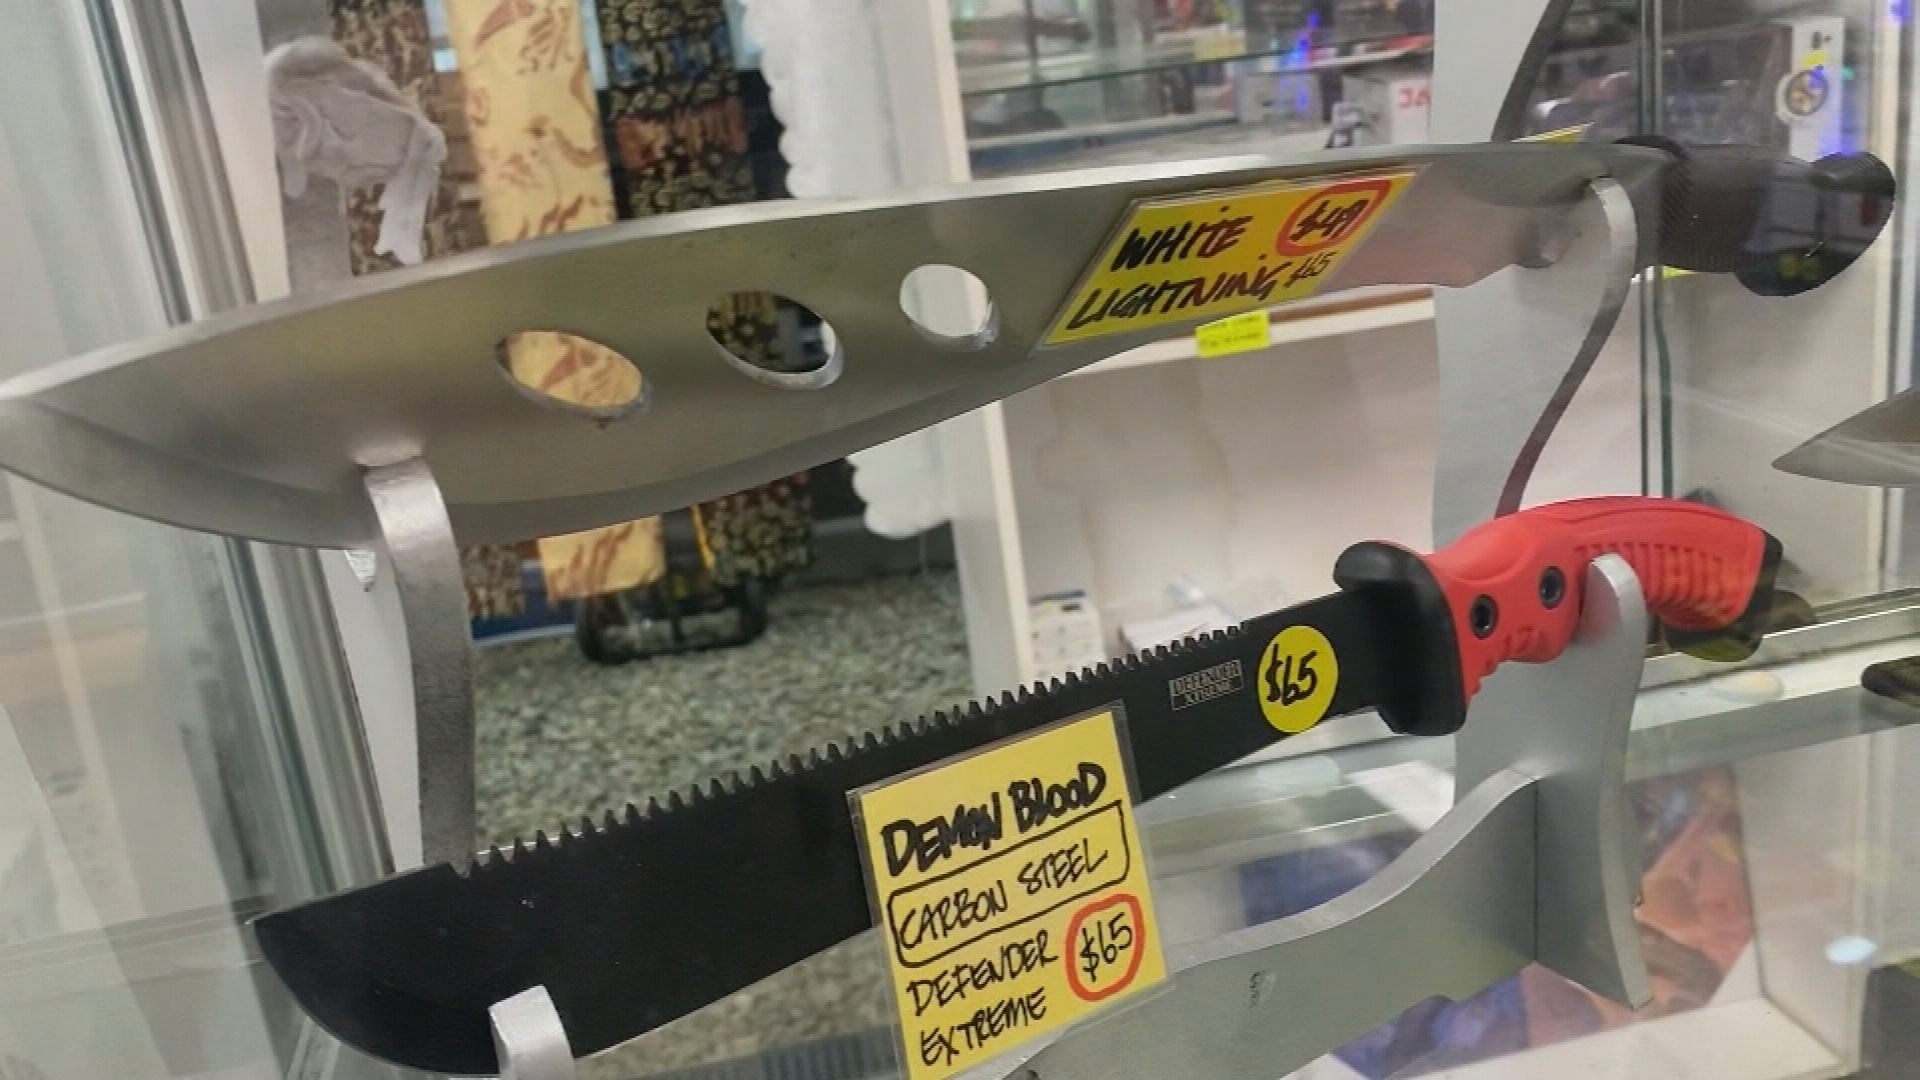 Queensland fast-tracks ban on sale of knives to minors